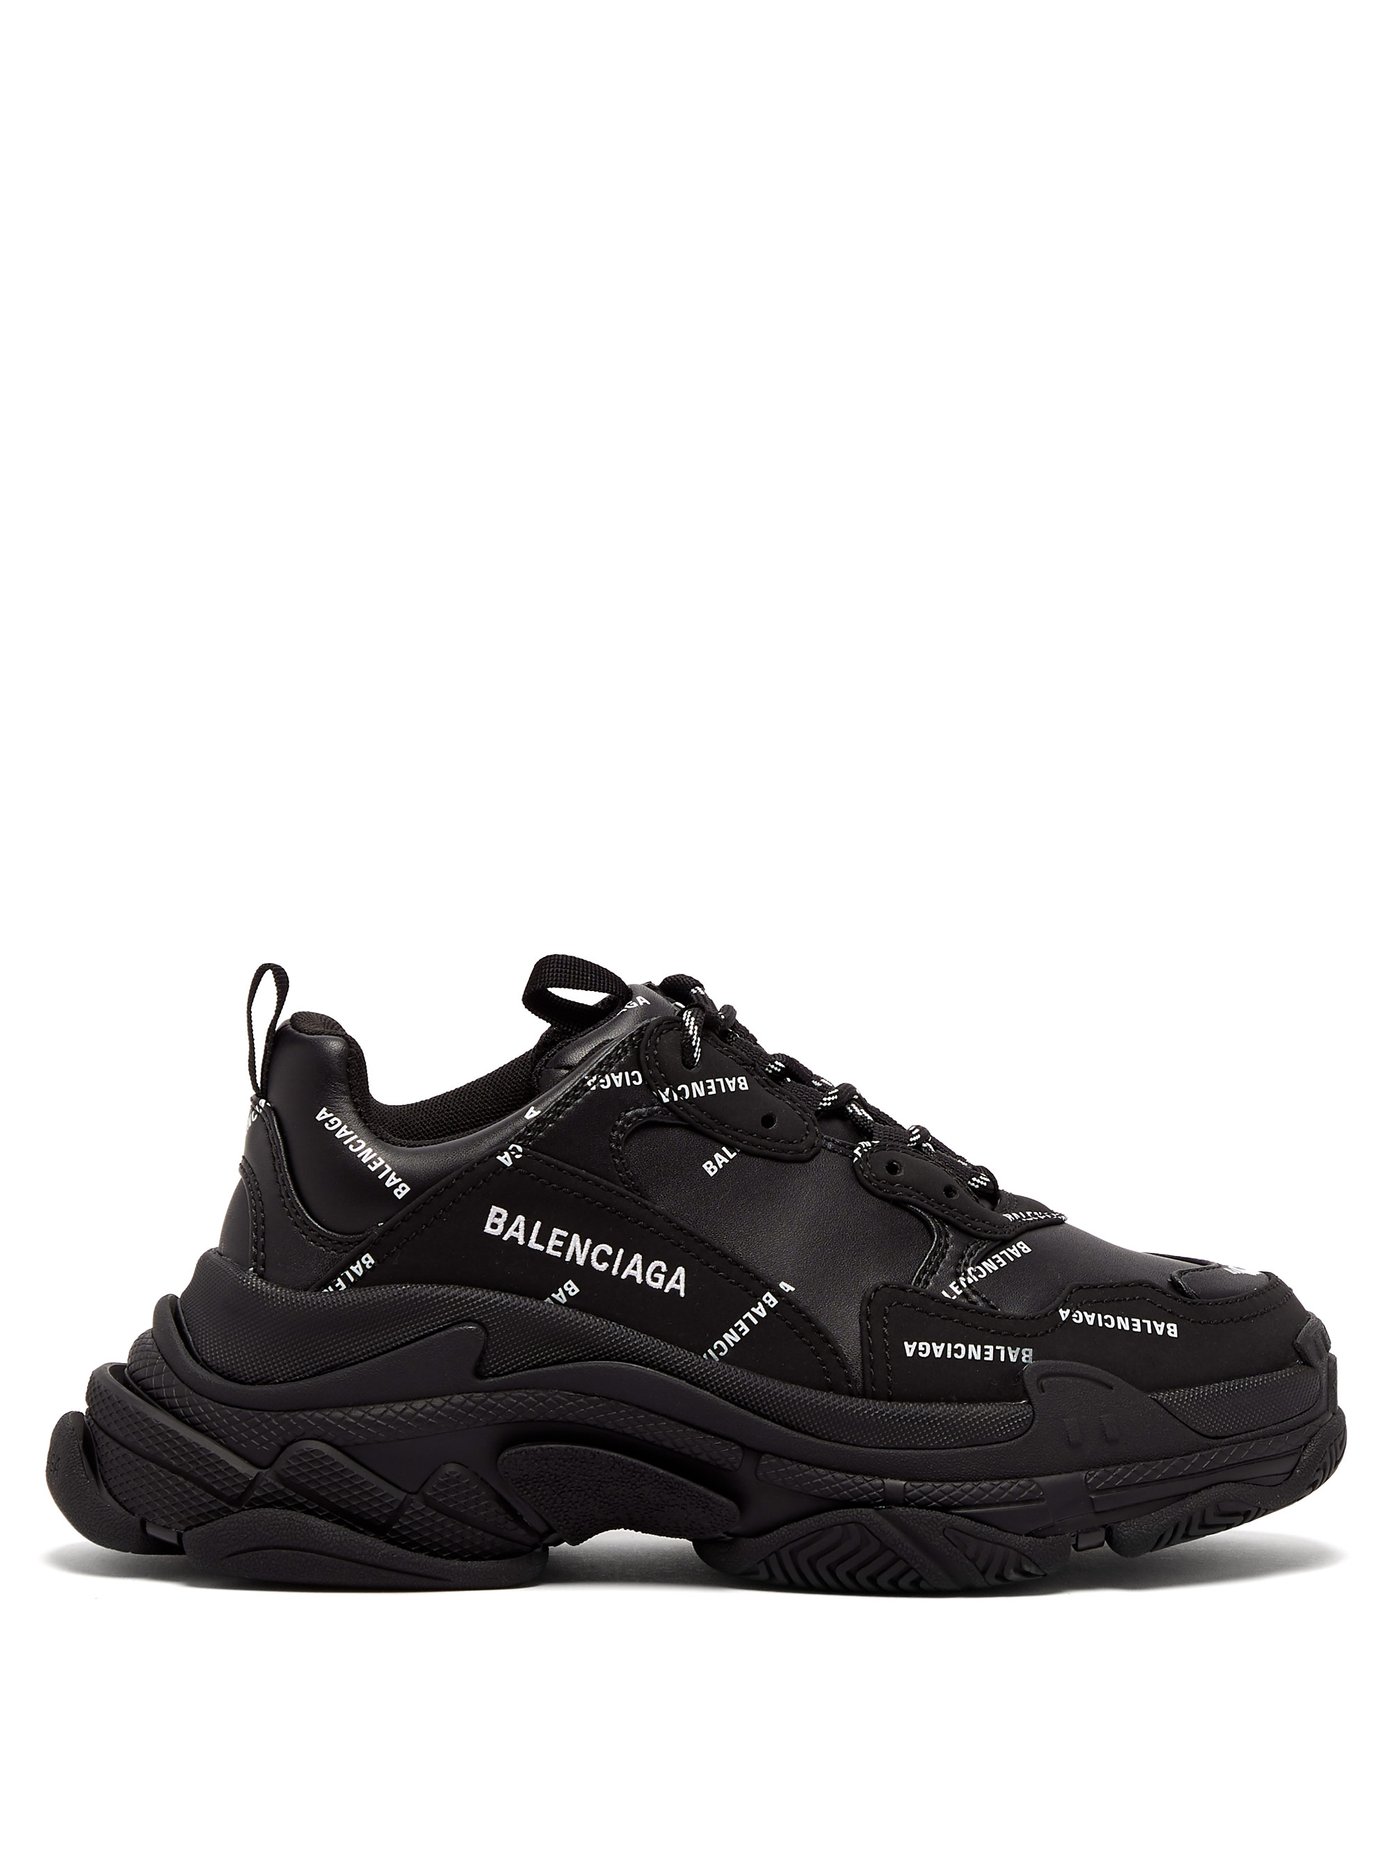 Balenciaga s Triple S Logo Could Be A Low Key Reference to